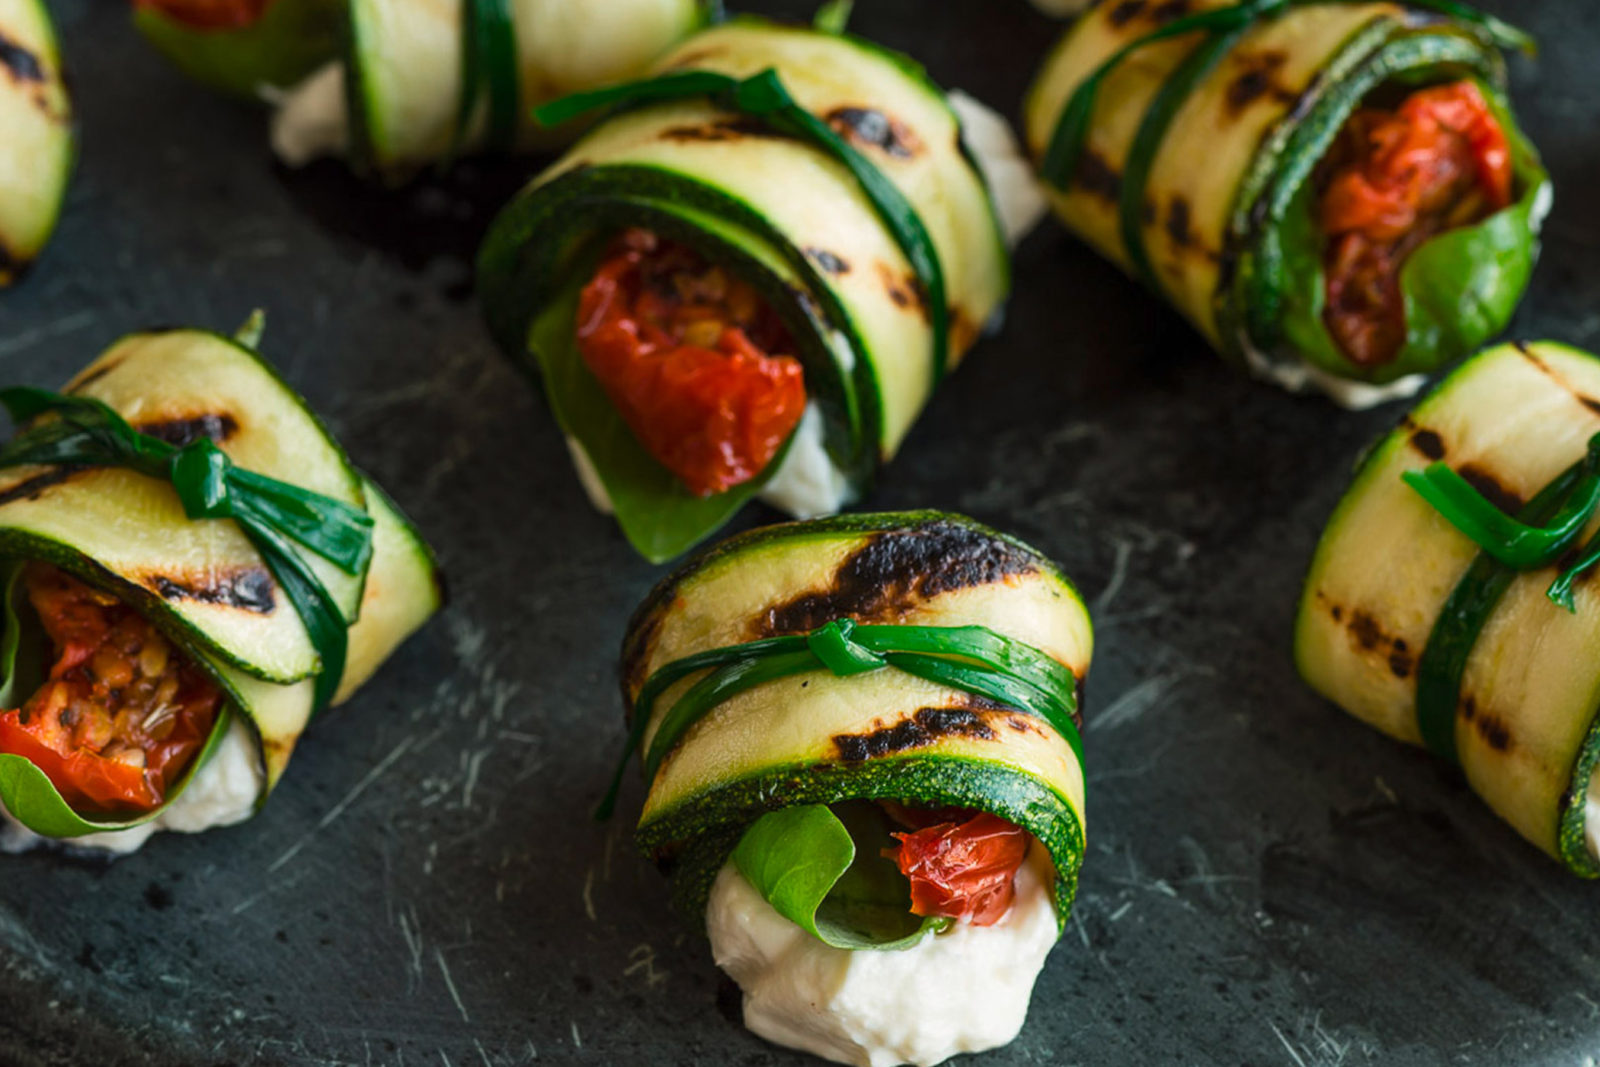 Courgette Canapé - London Catering - Weddings - Events